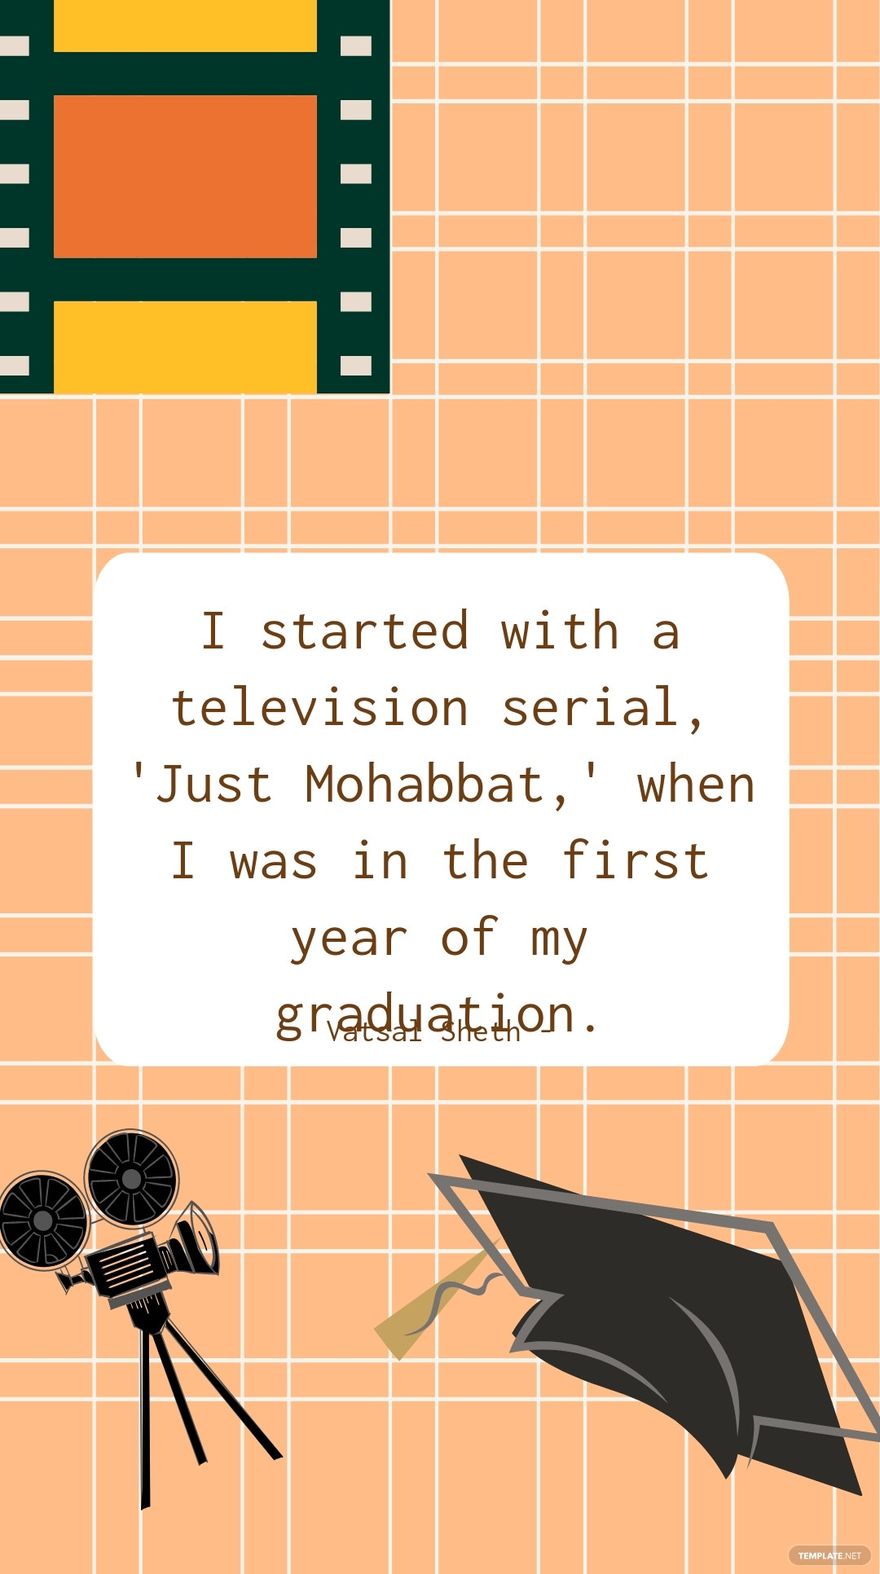 Vatsal Sheth - I started with a television serial, 'Just Mohabbat,' when I was in the first year of my graduation. in JPG